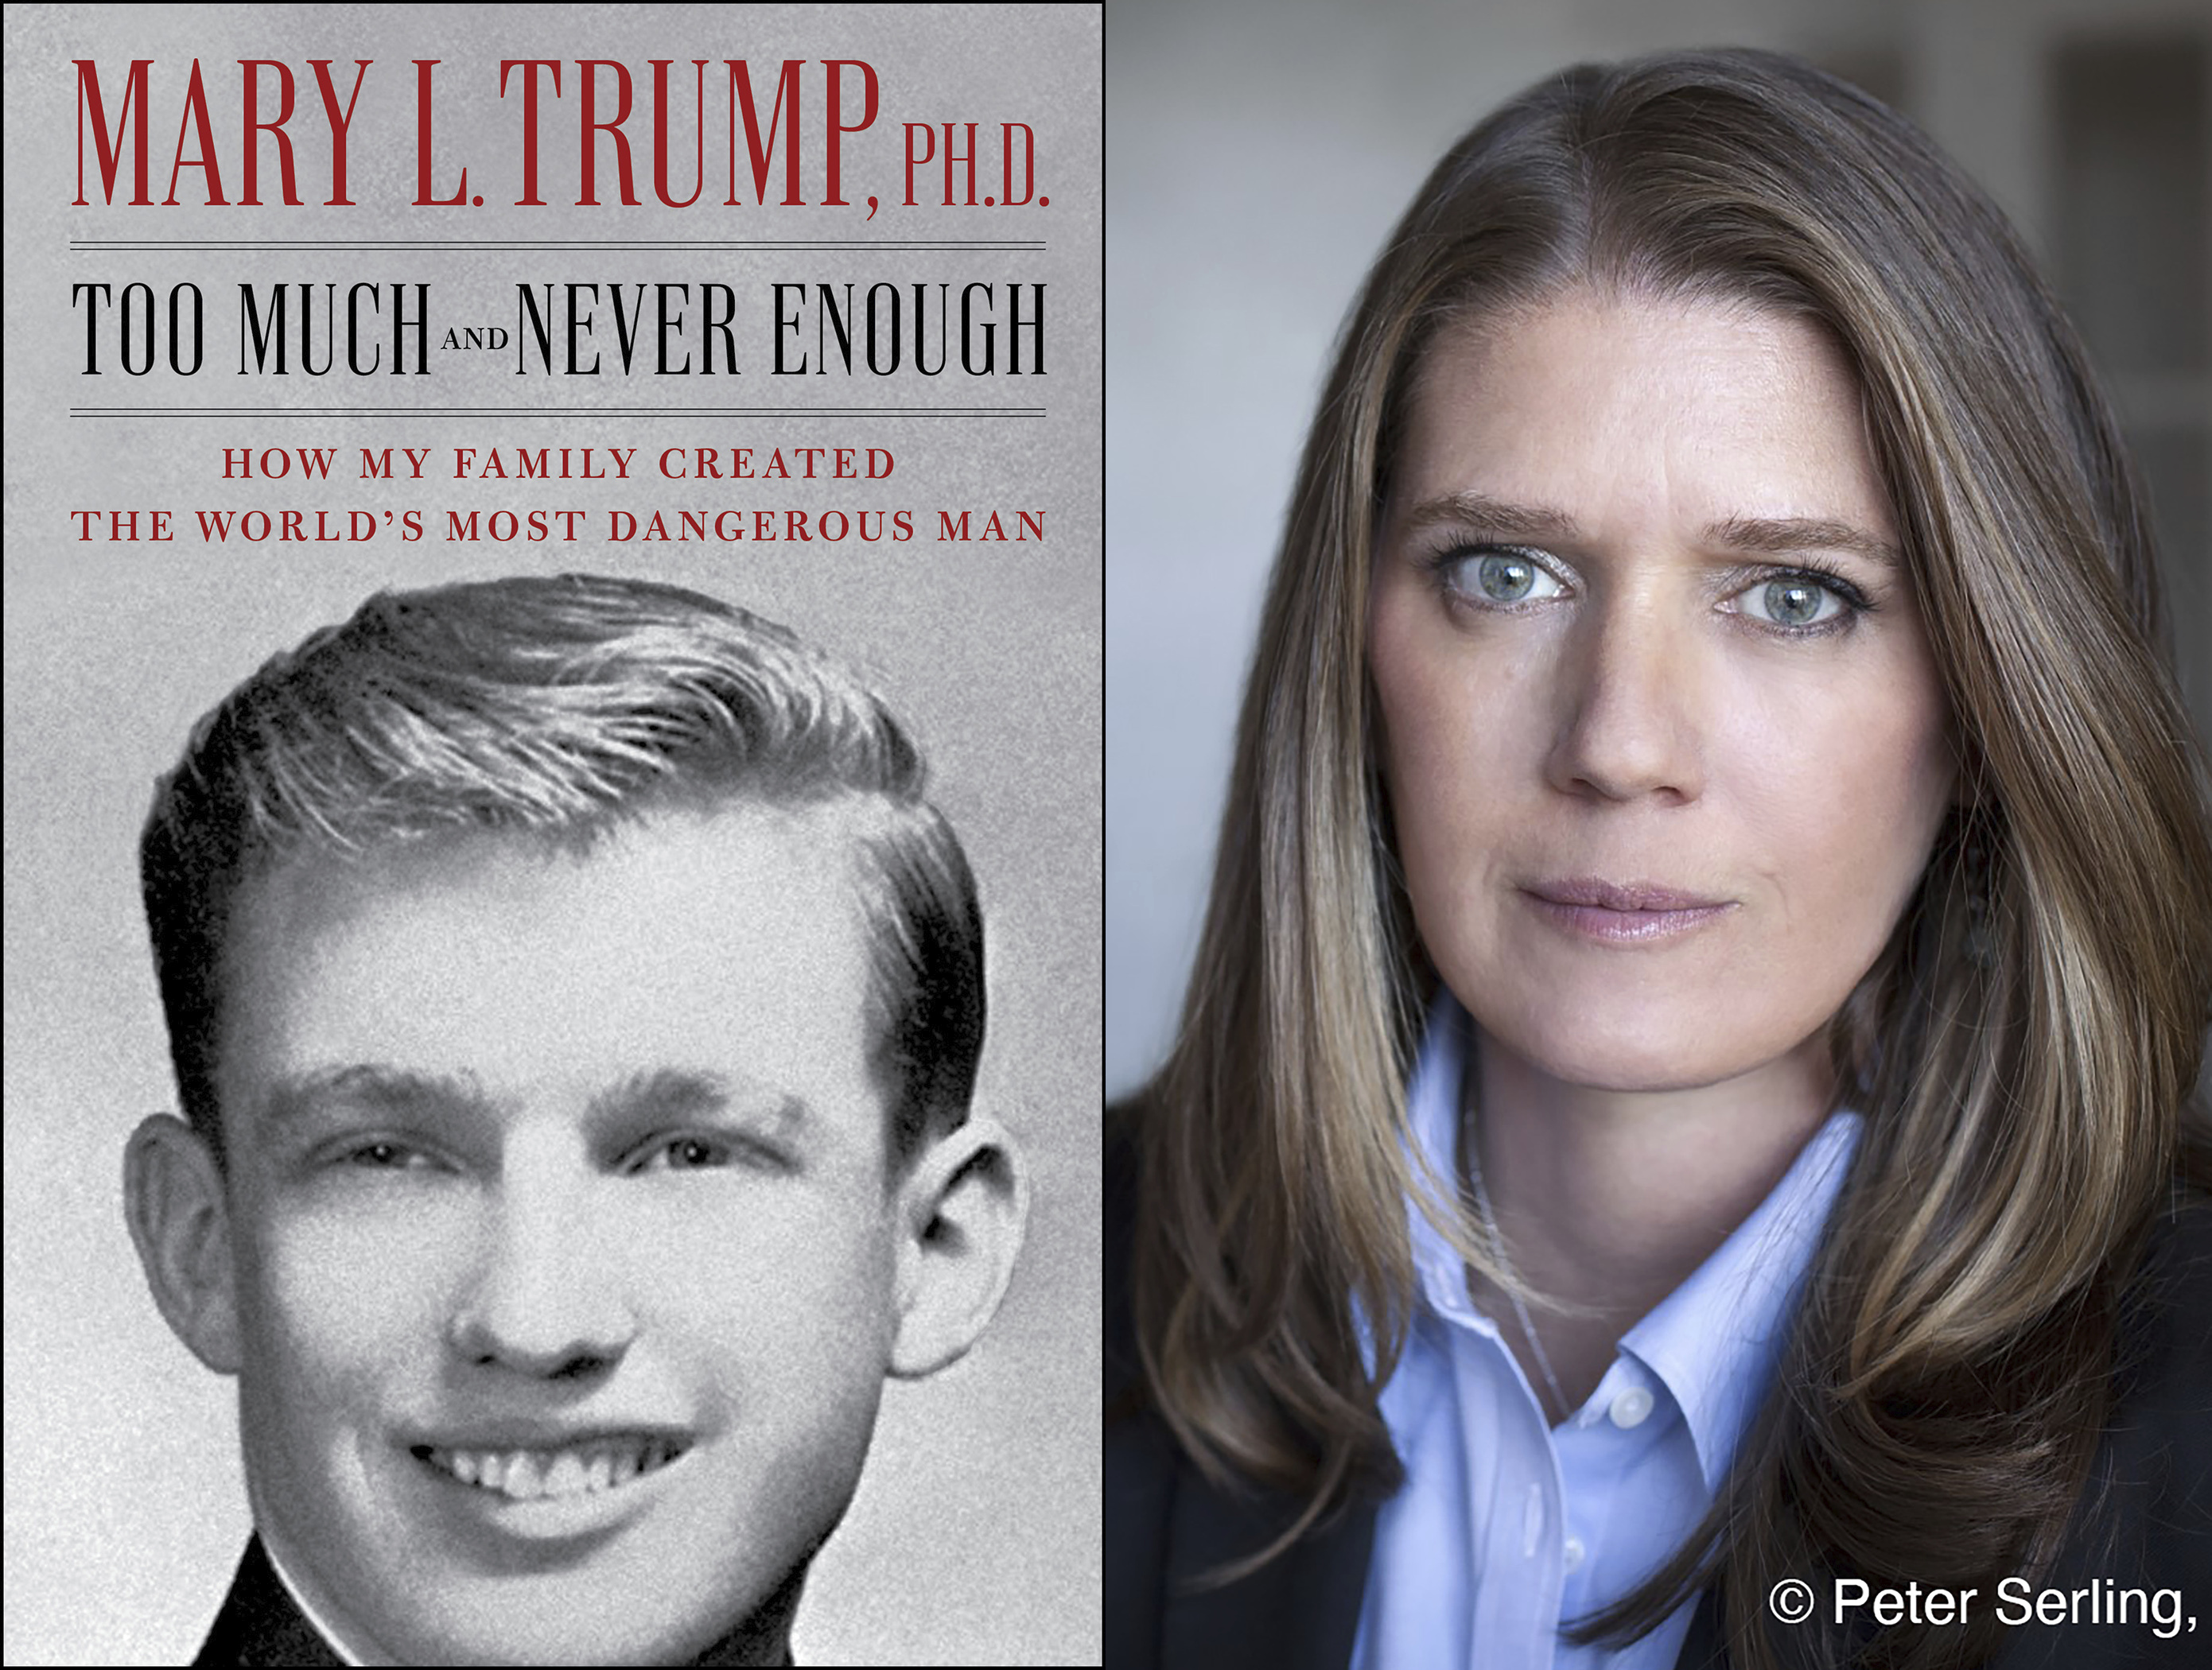 Mary Trump and the cover of her book